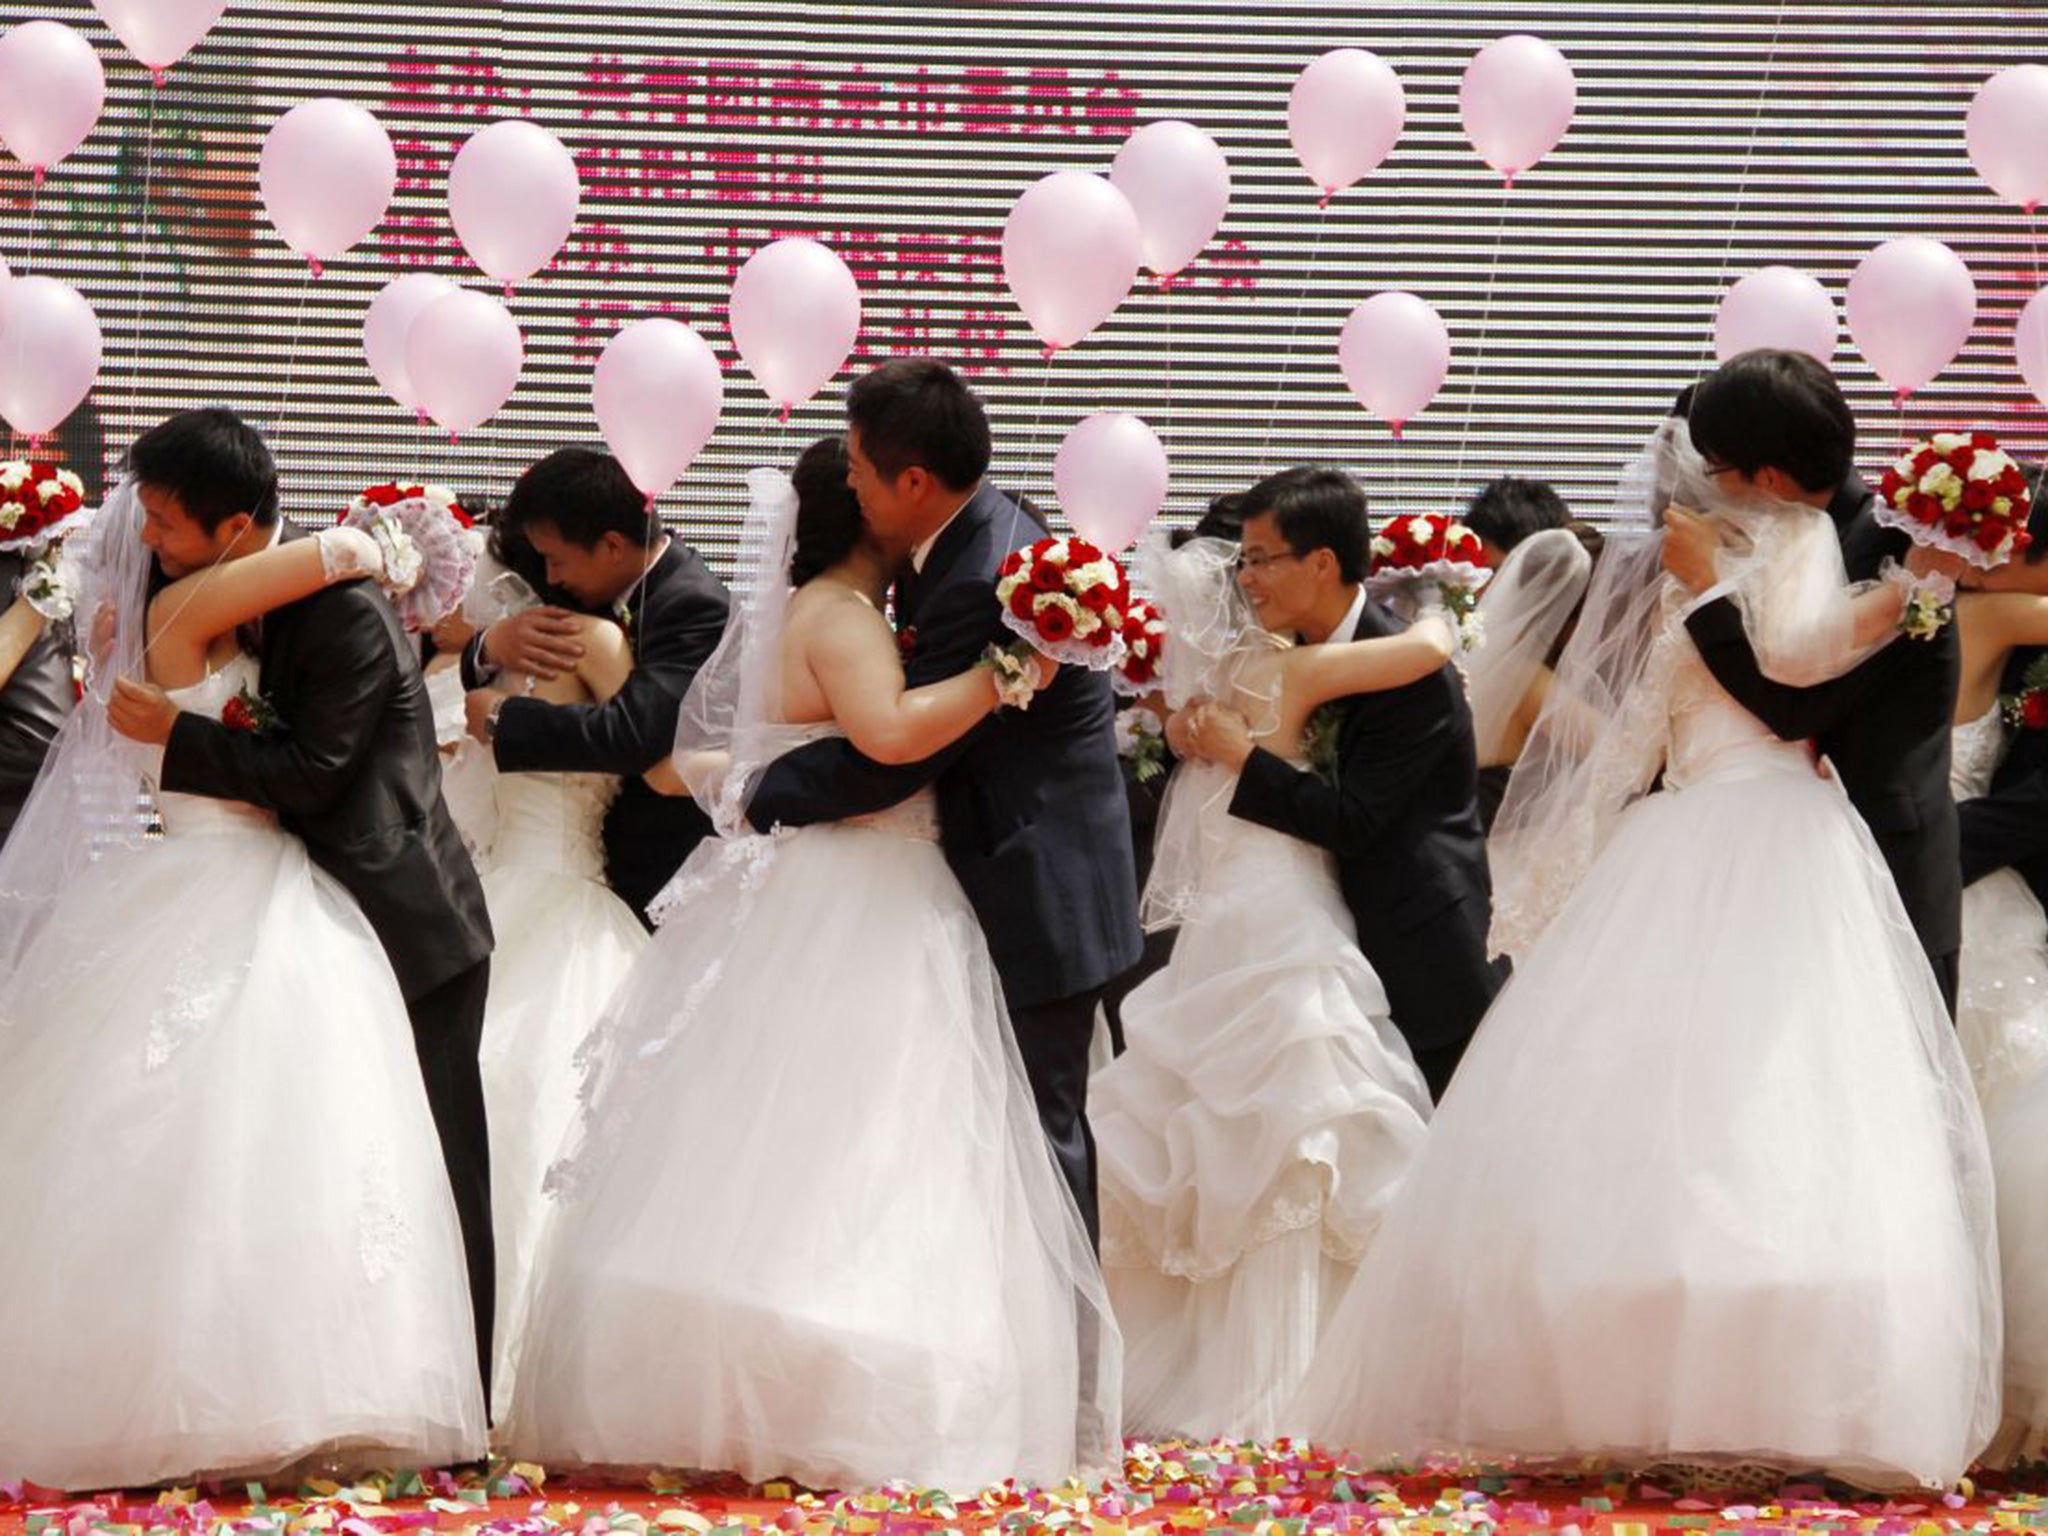 A May Day mass wedding in Nanjing. Thousands of ‘heterosexual’ marriages are in fact a front for gay couples in China